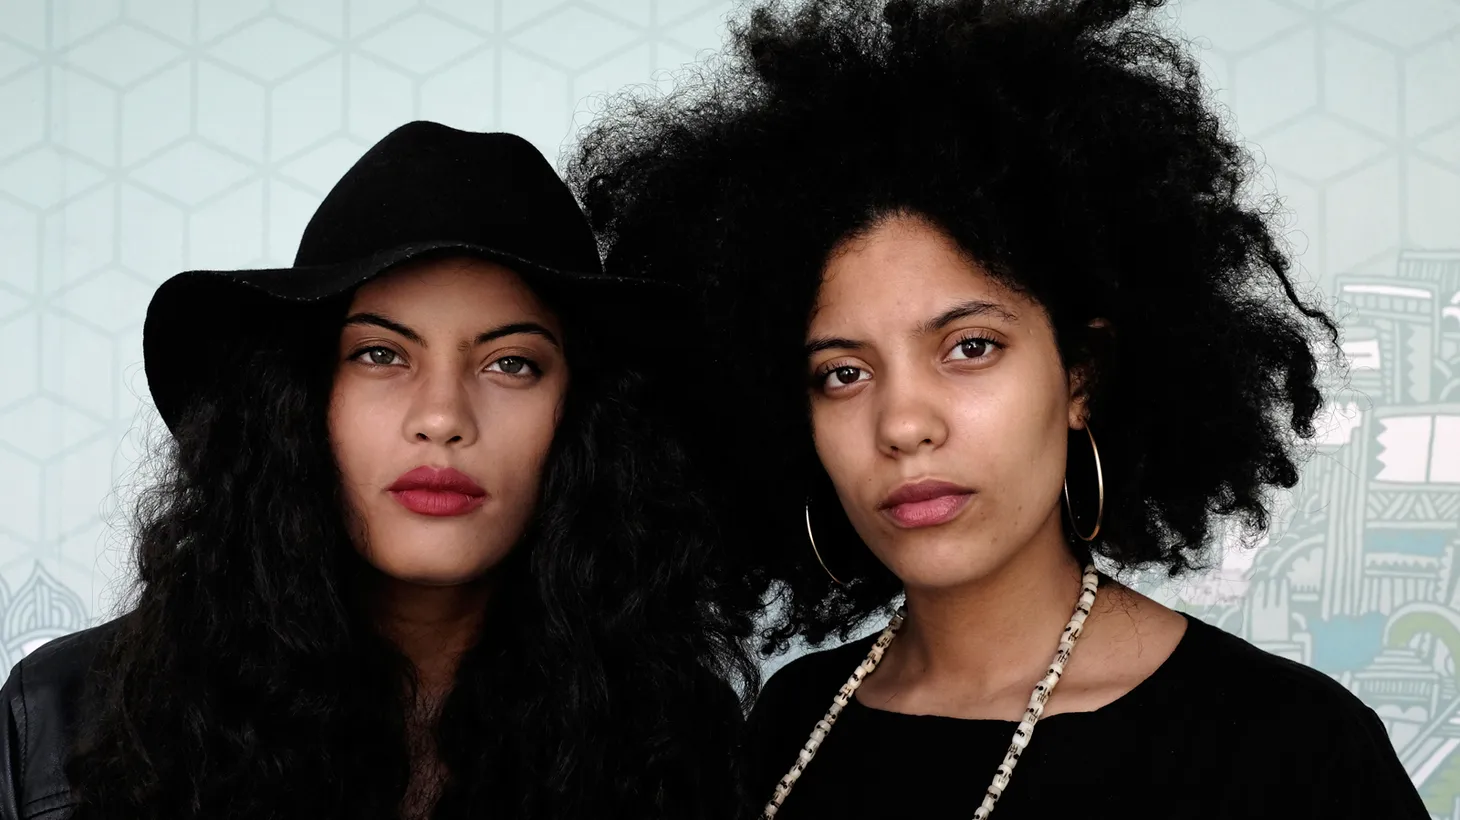 Ibeyi released a stunning debut album last year. The buzz continues to build for these siblings who integrate elements of their French-Cuban ancestry and Yoruba upbringing into their soulful music.